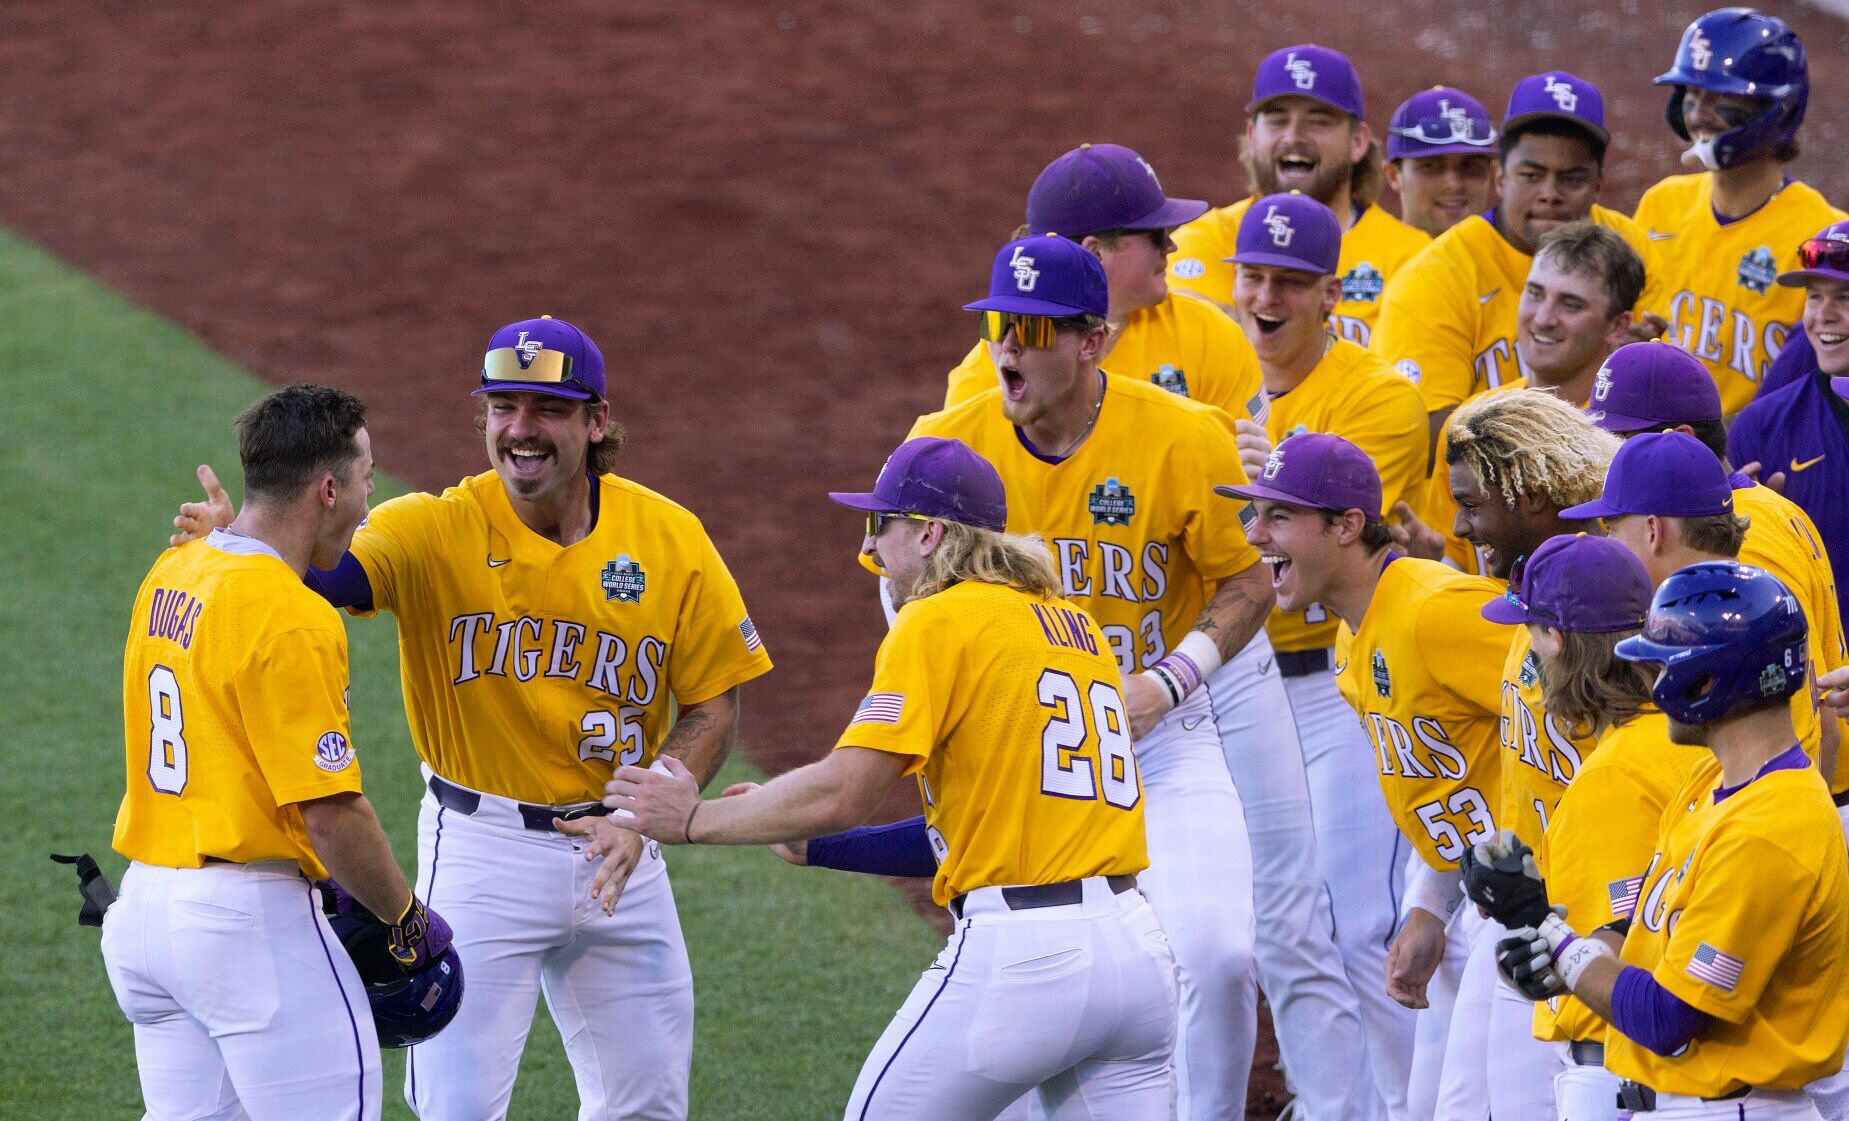 Cade Belosos HR lifts LSU over Florida in Game 1 of image